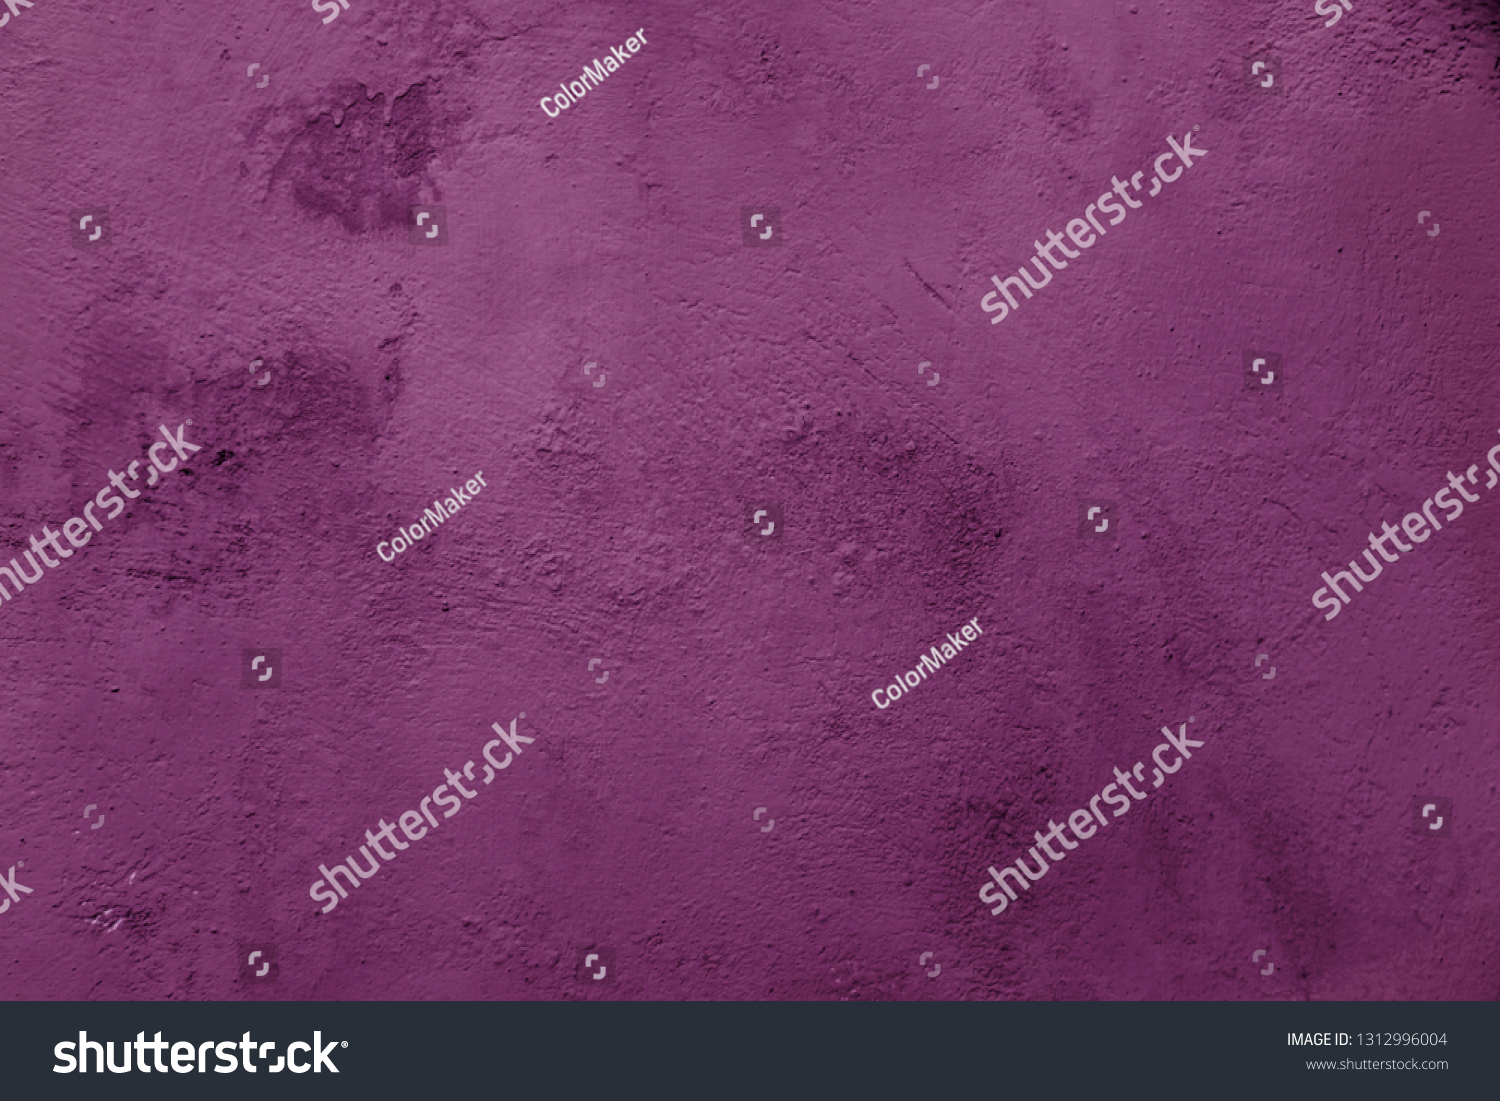 Grunge concrete wall texture background with stains #1312996004